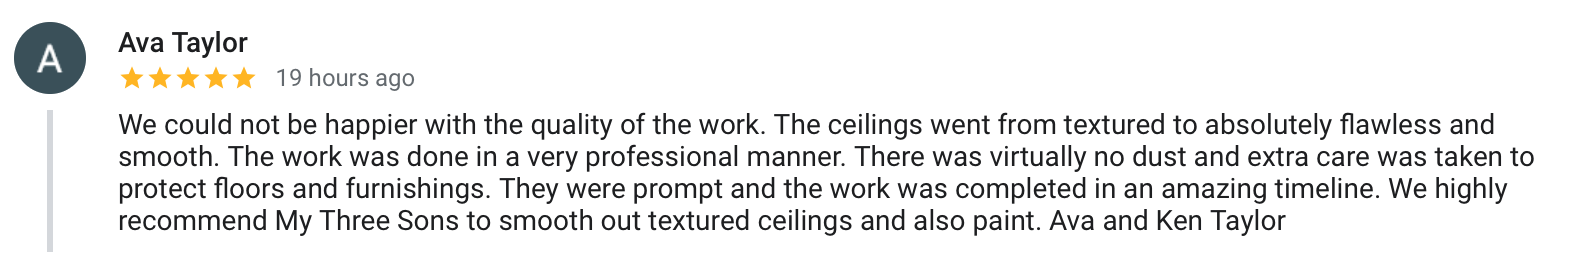 Textured ceiling removal review